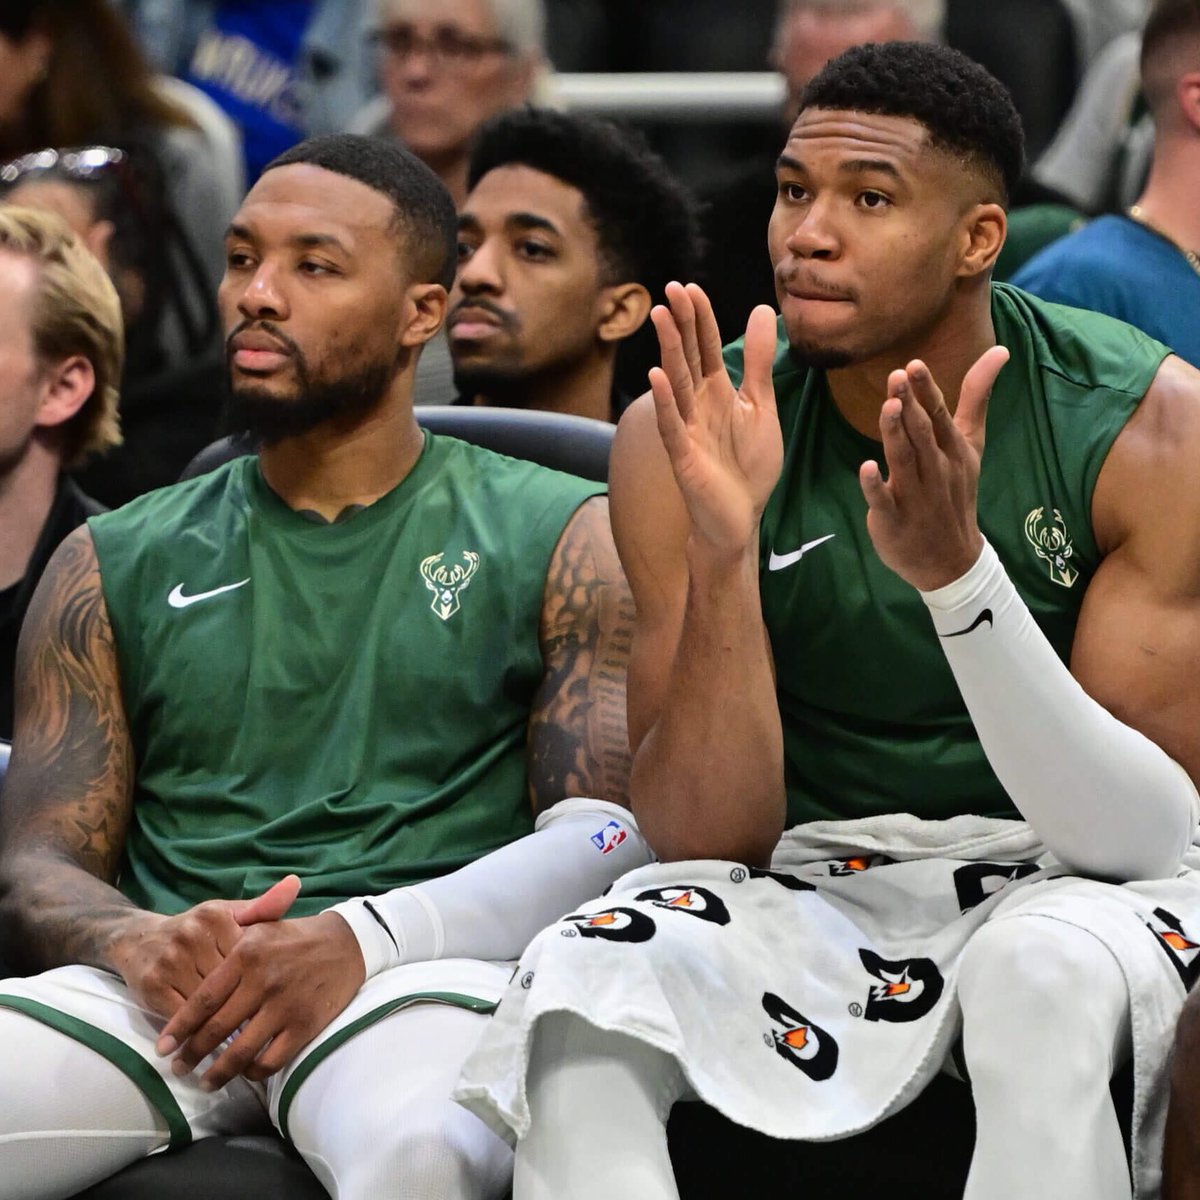 BREAKING: Giannis and Damian Lillard are doubtful for the Bucks potential elimination Game 5 vs. the Pacers, per @eric_nehm.